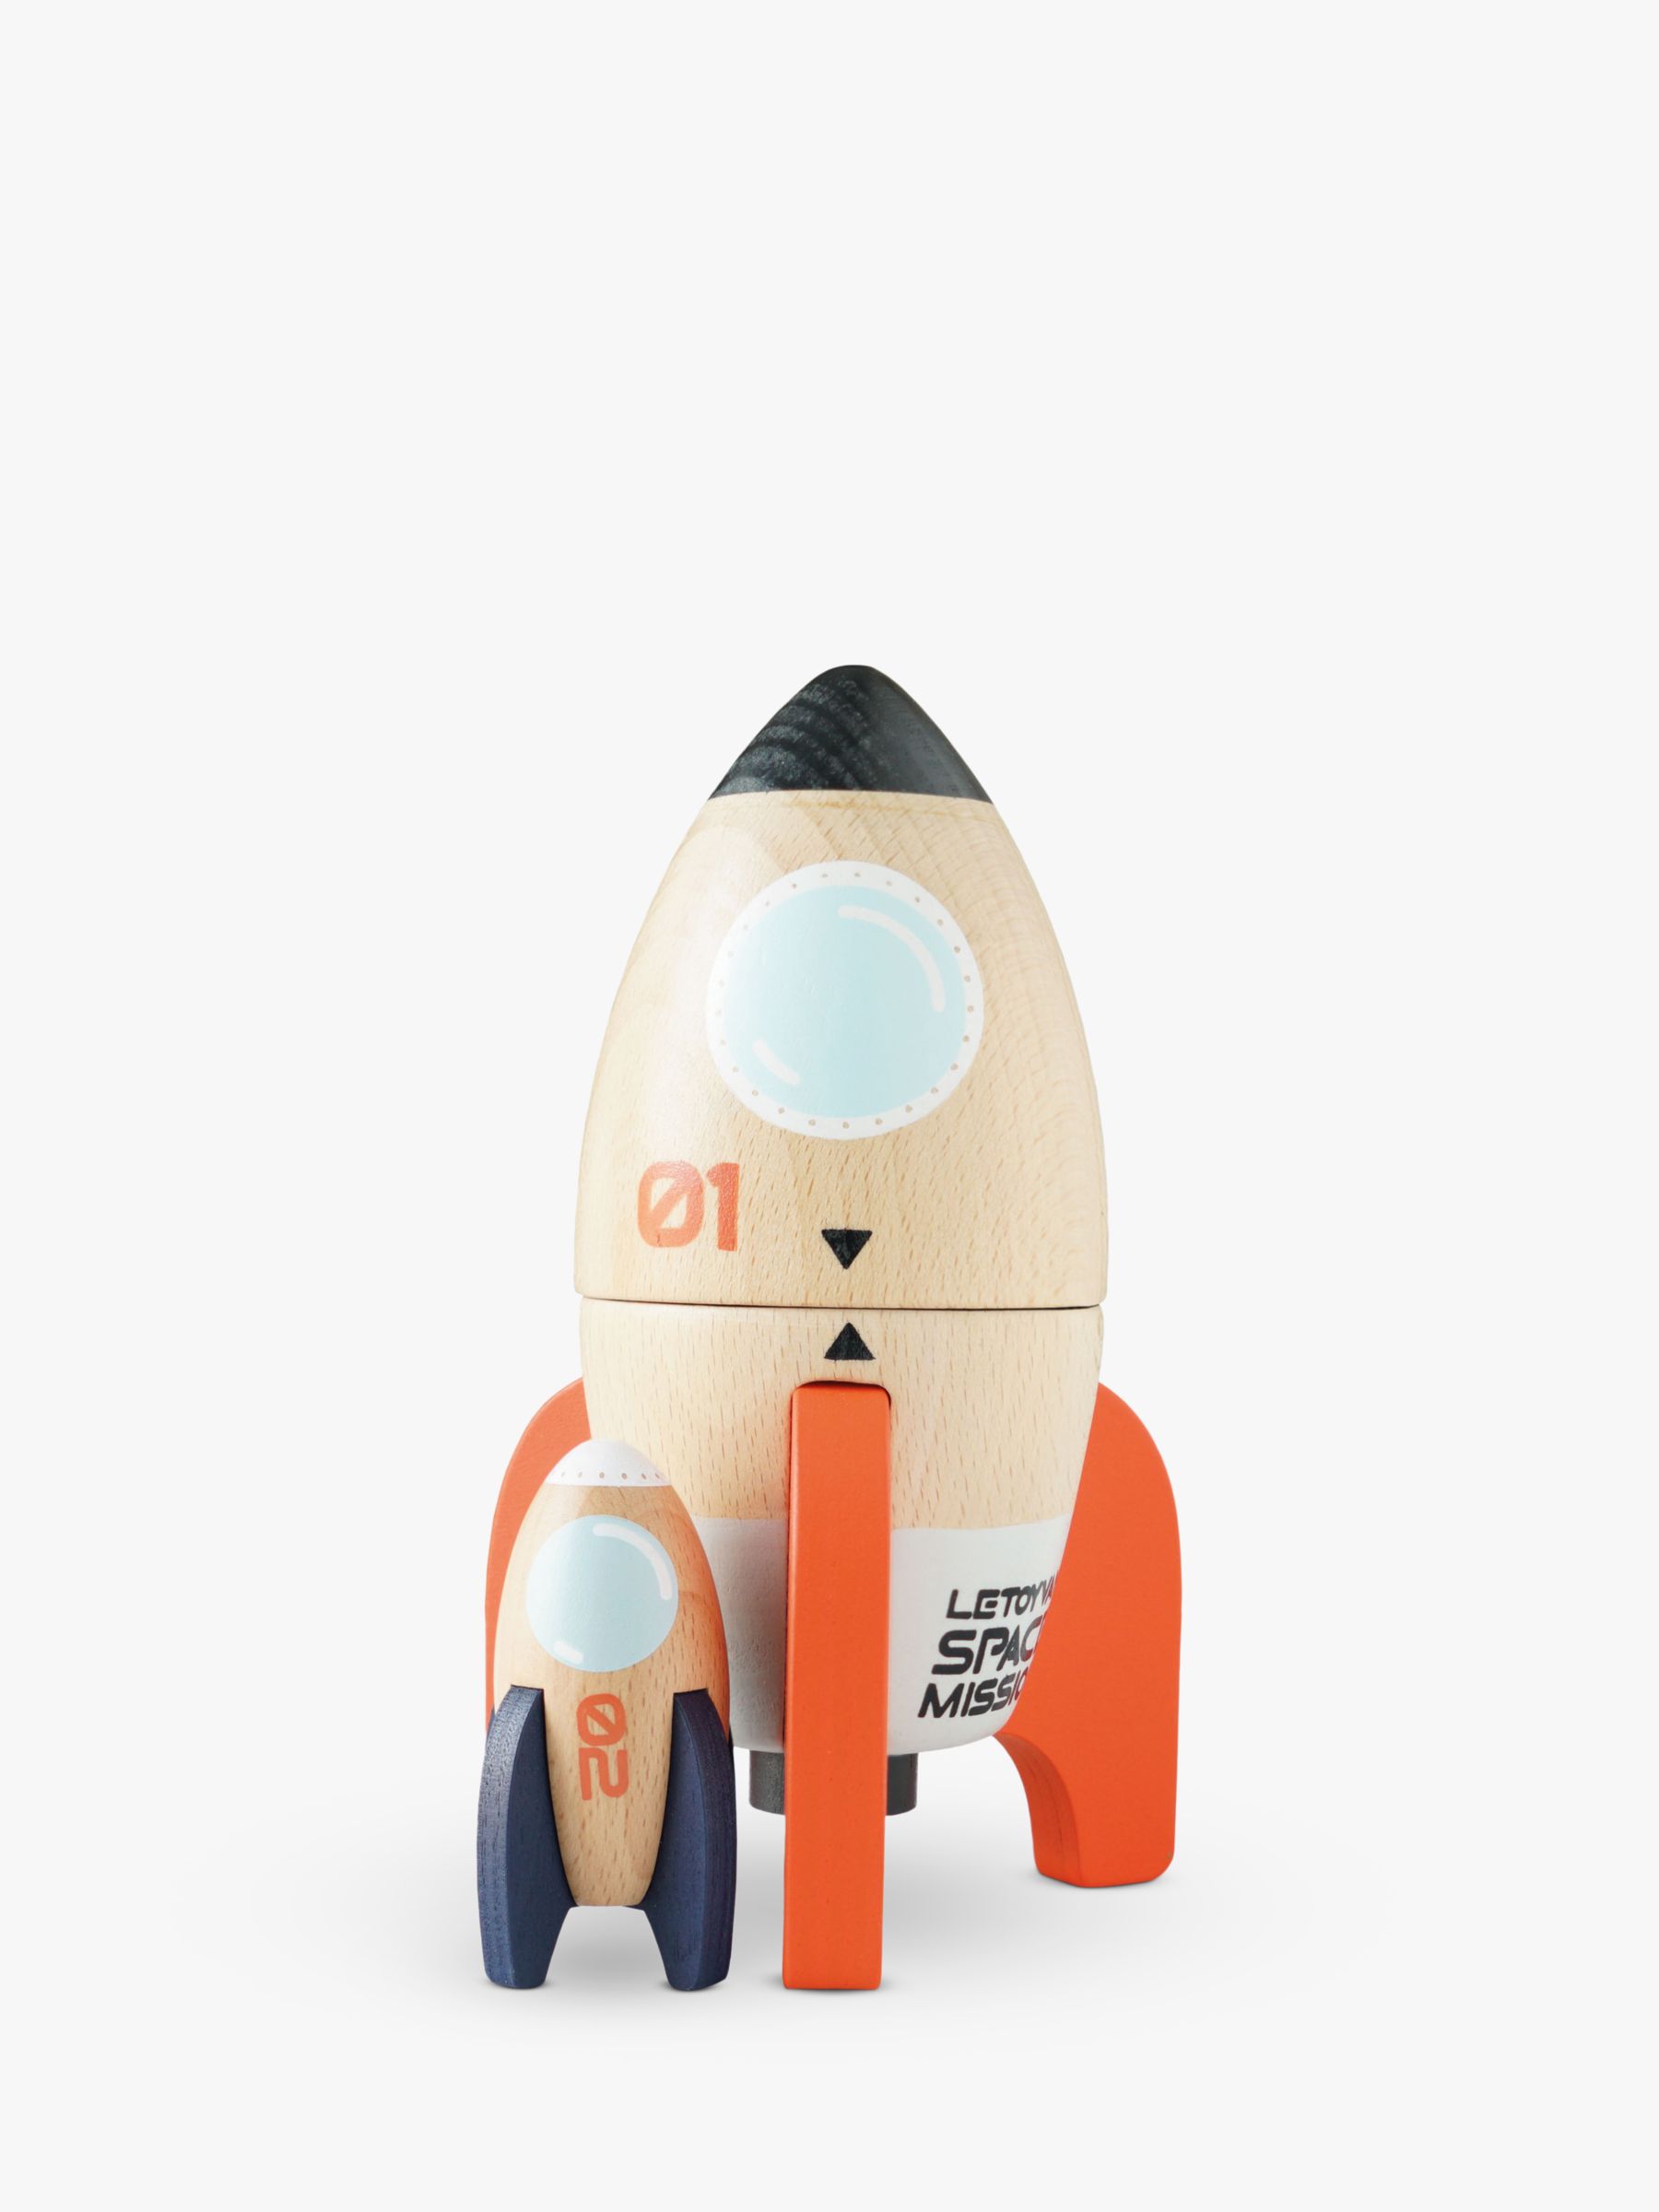 Toy Rockets, Toy Spaceships